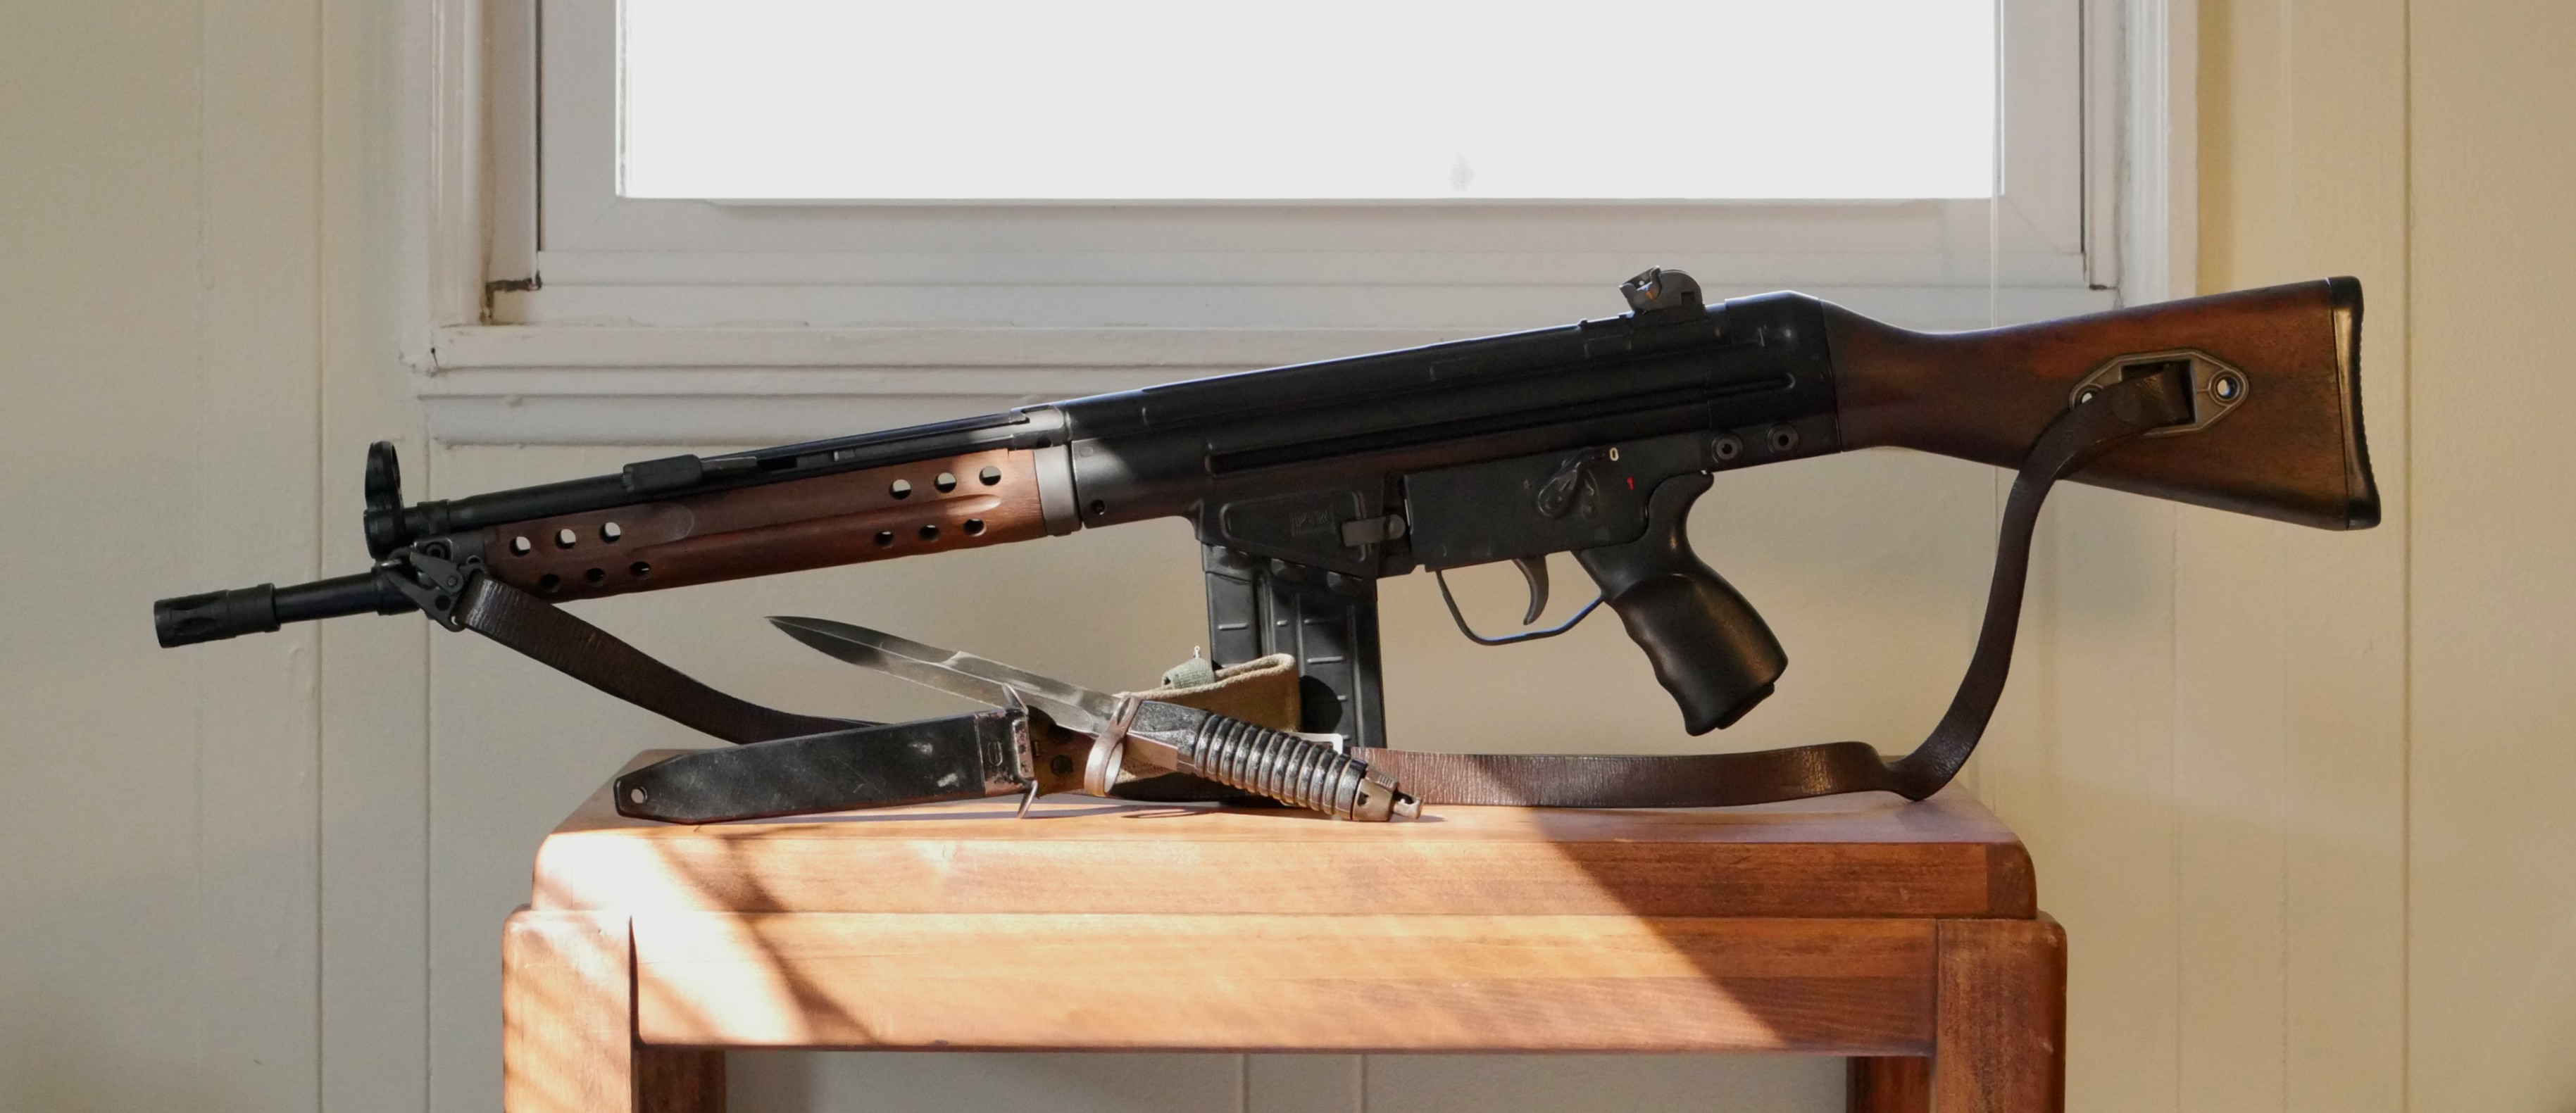 PTR with wood furniture and bayonet